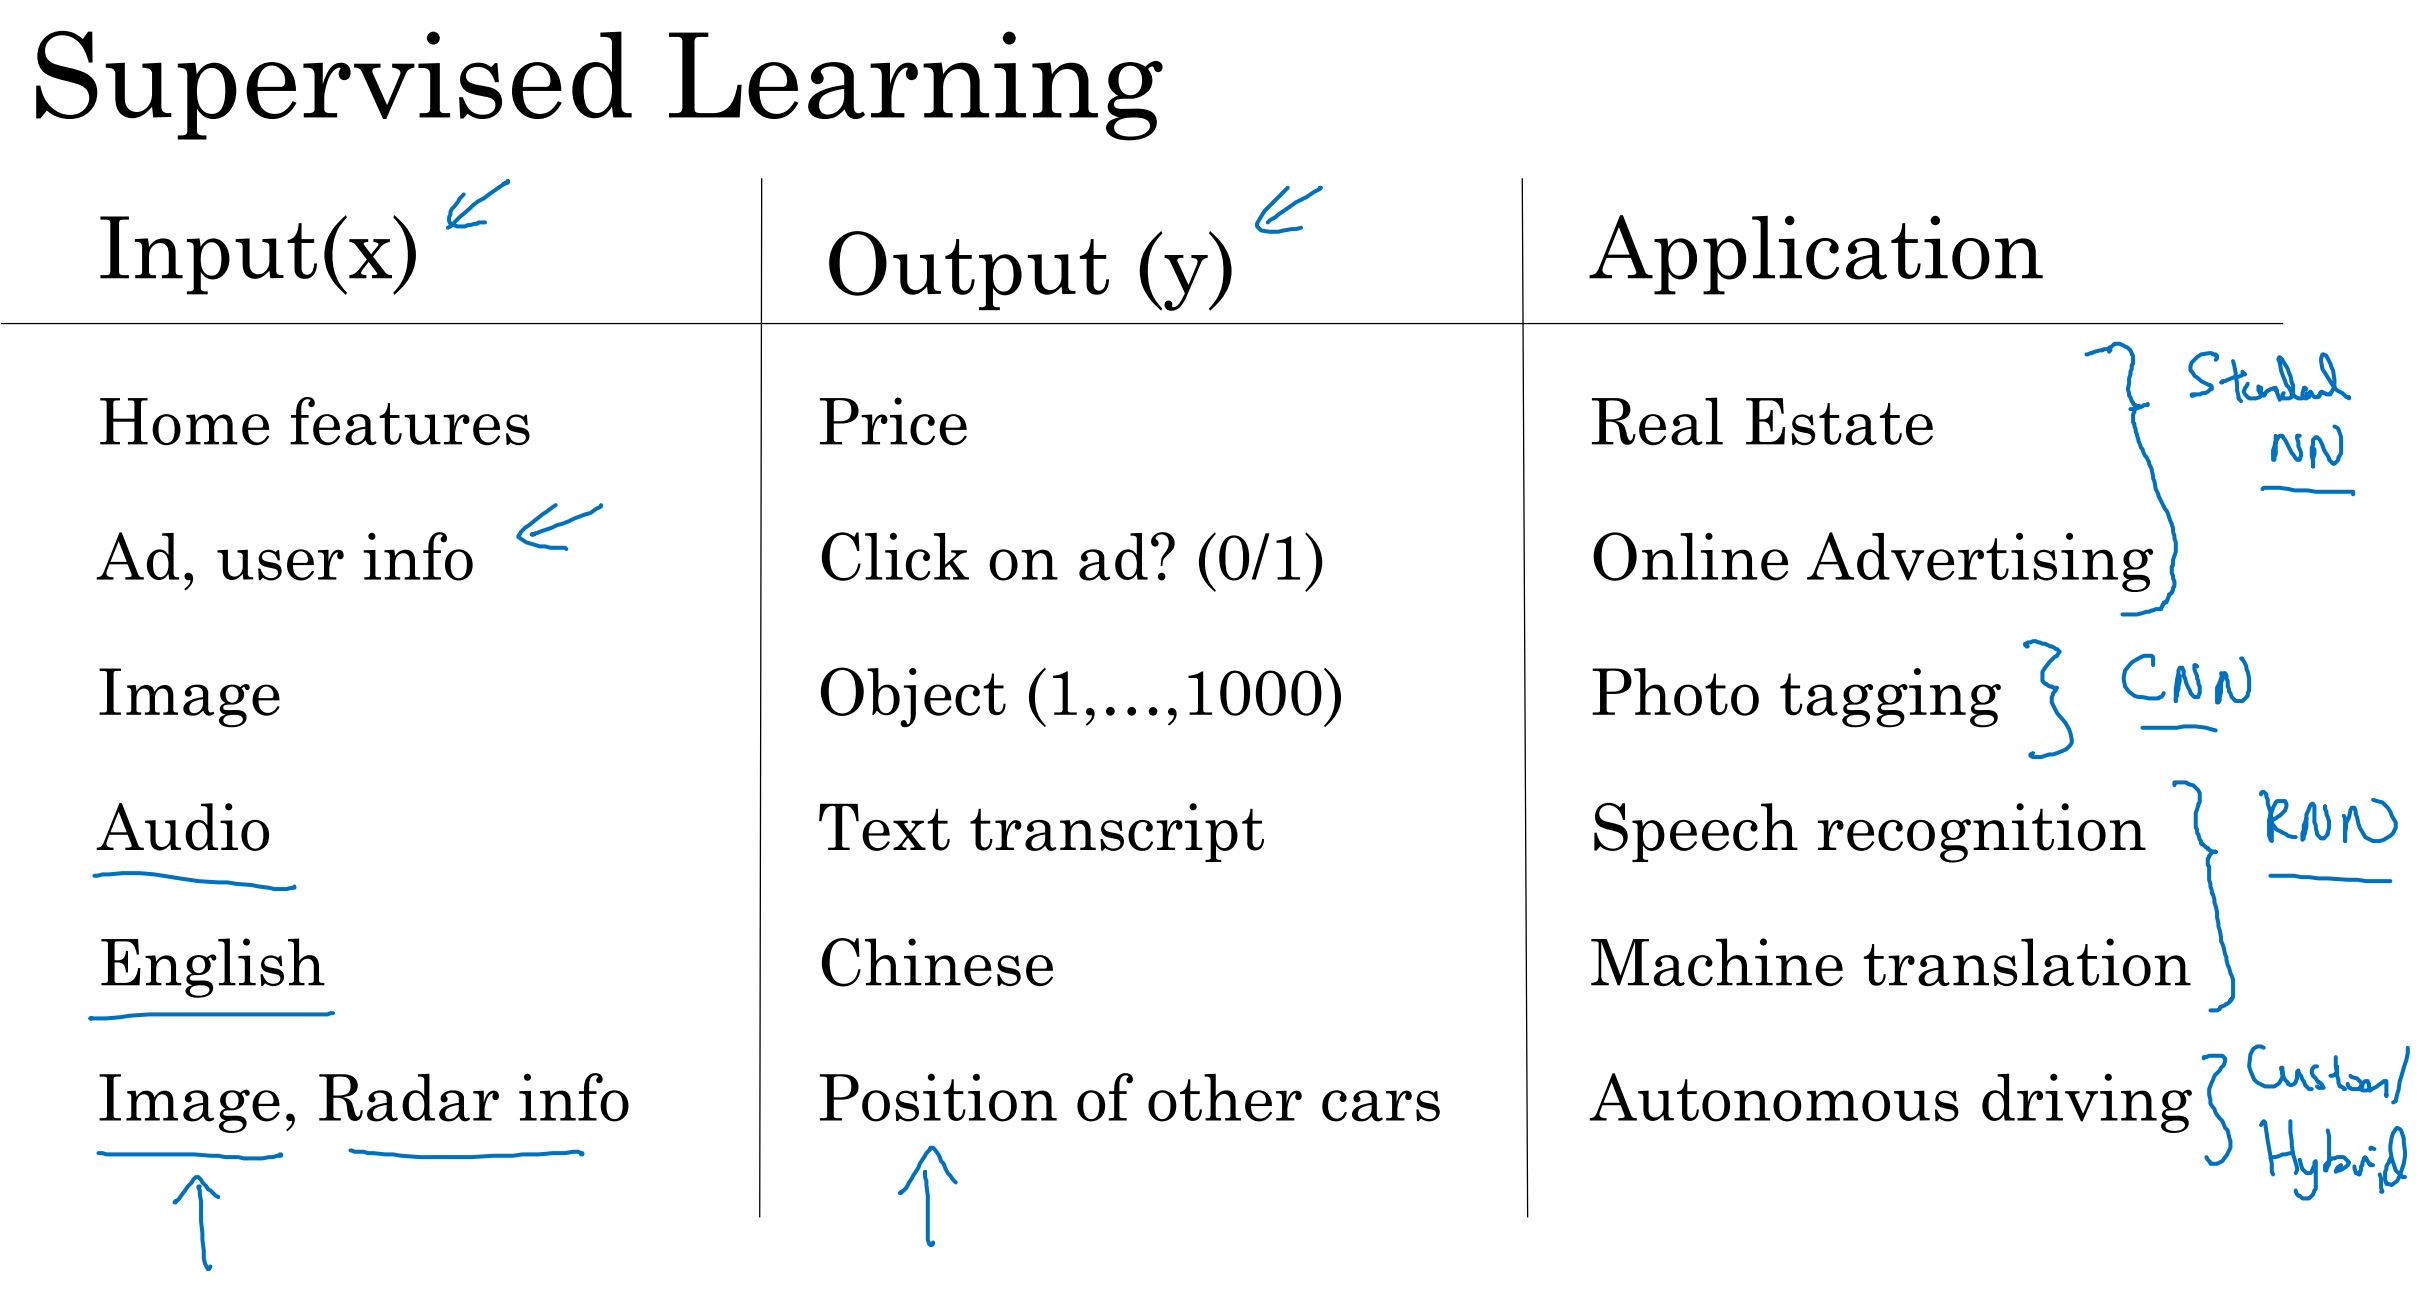 Supervised Learning with DL